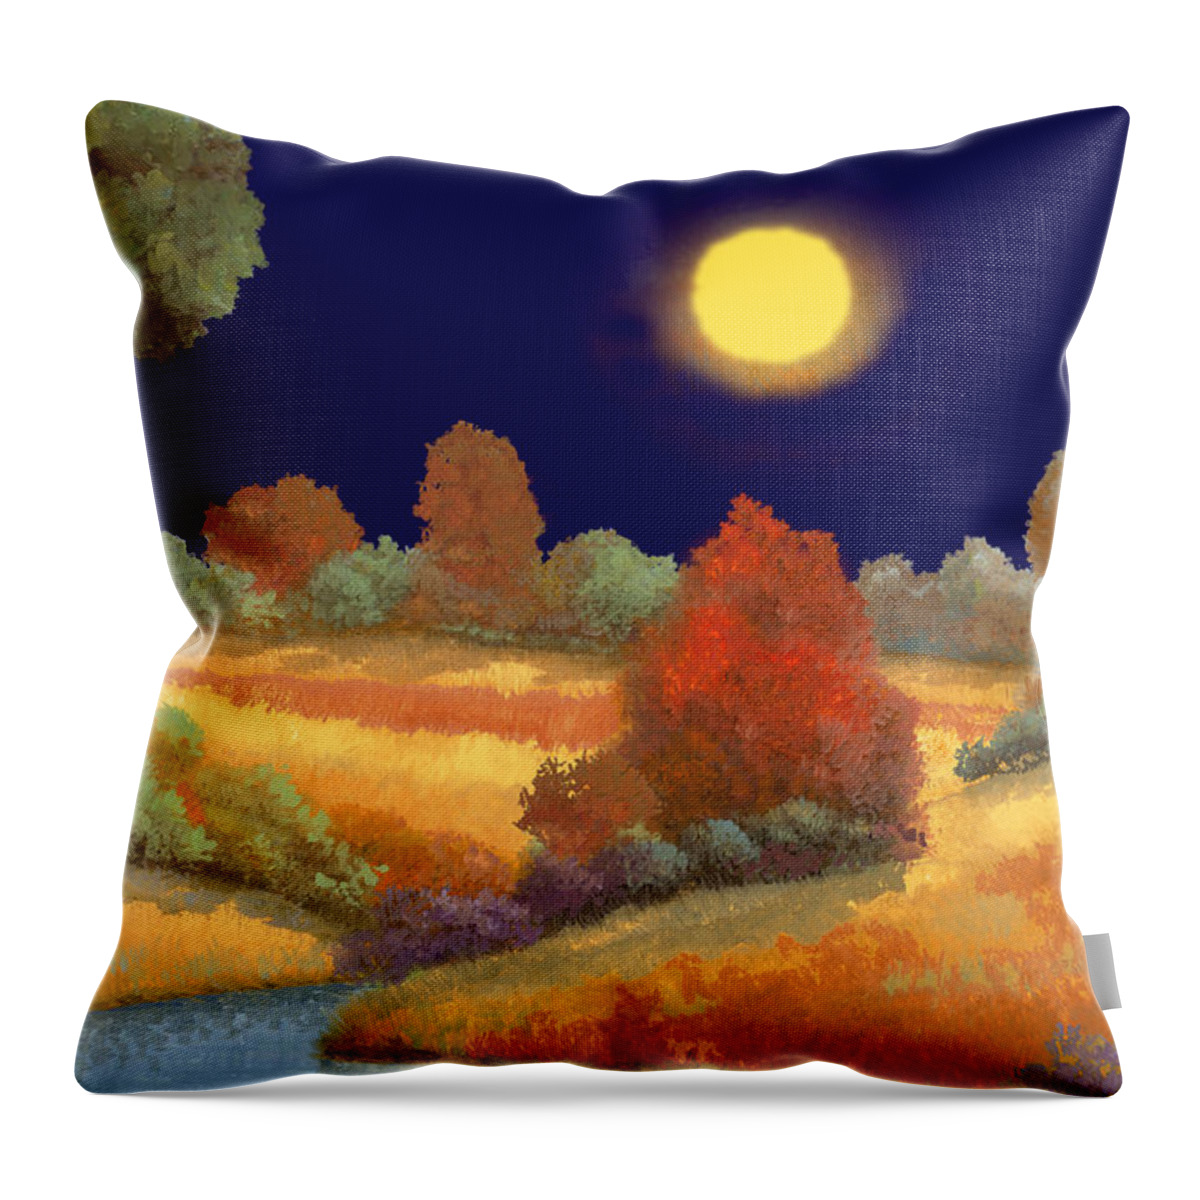 Night Throw Pillow featuring the painting La Musica Della Notte by Guido Borelli